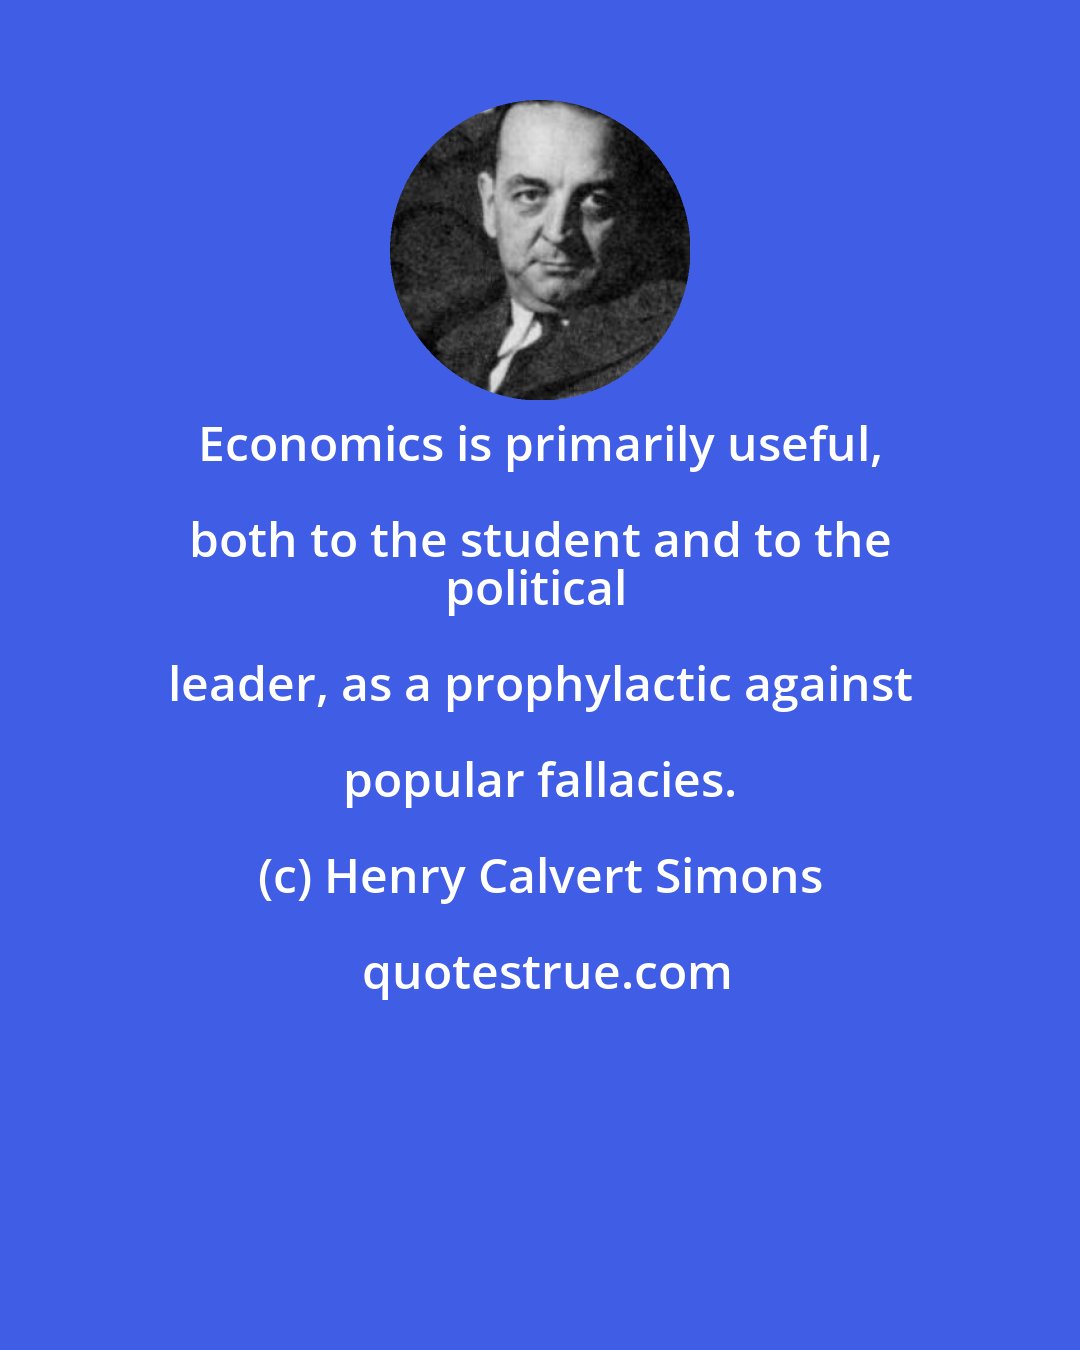 Henry Calvert Simons: Economics is primarily useful, both to the student and to the 
political leader, as a prophylactic against popular fallacies.